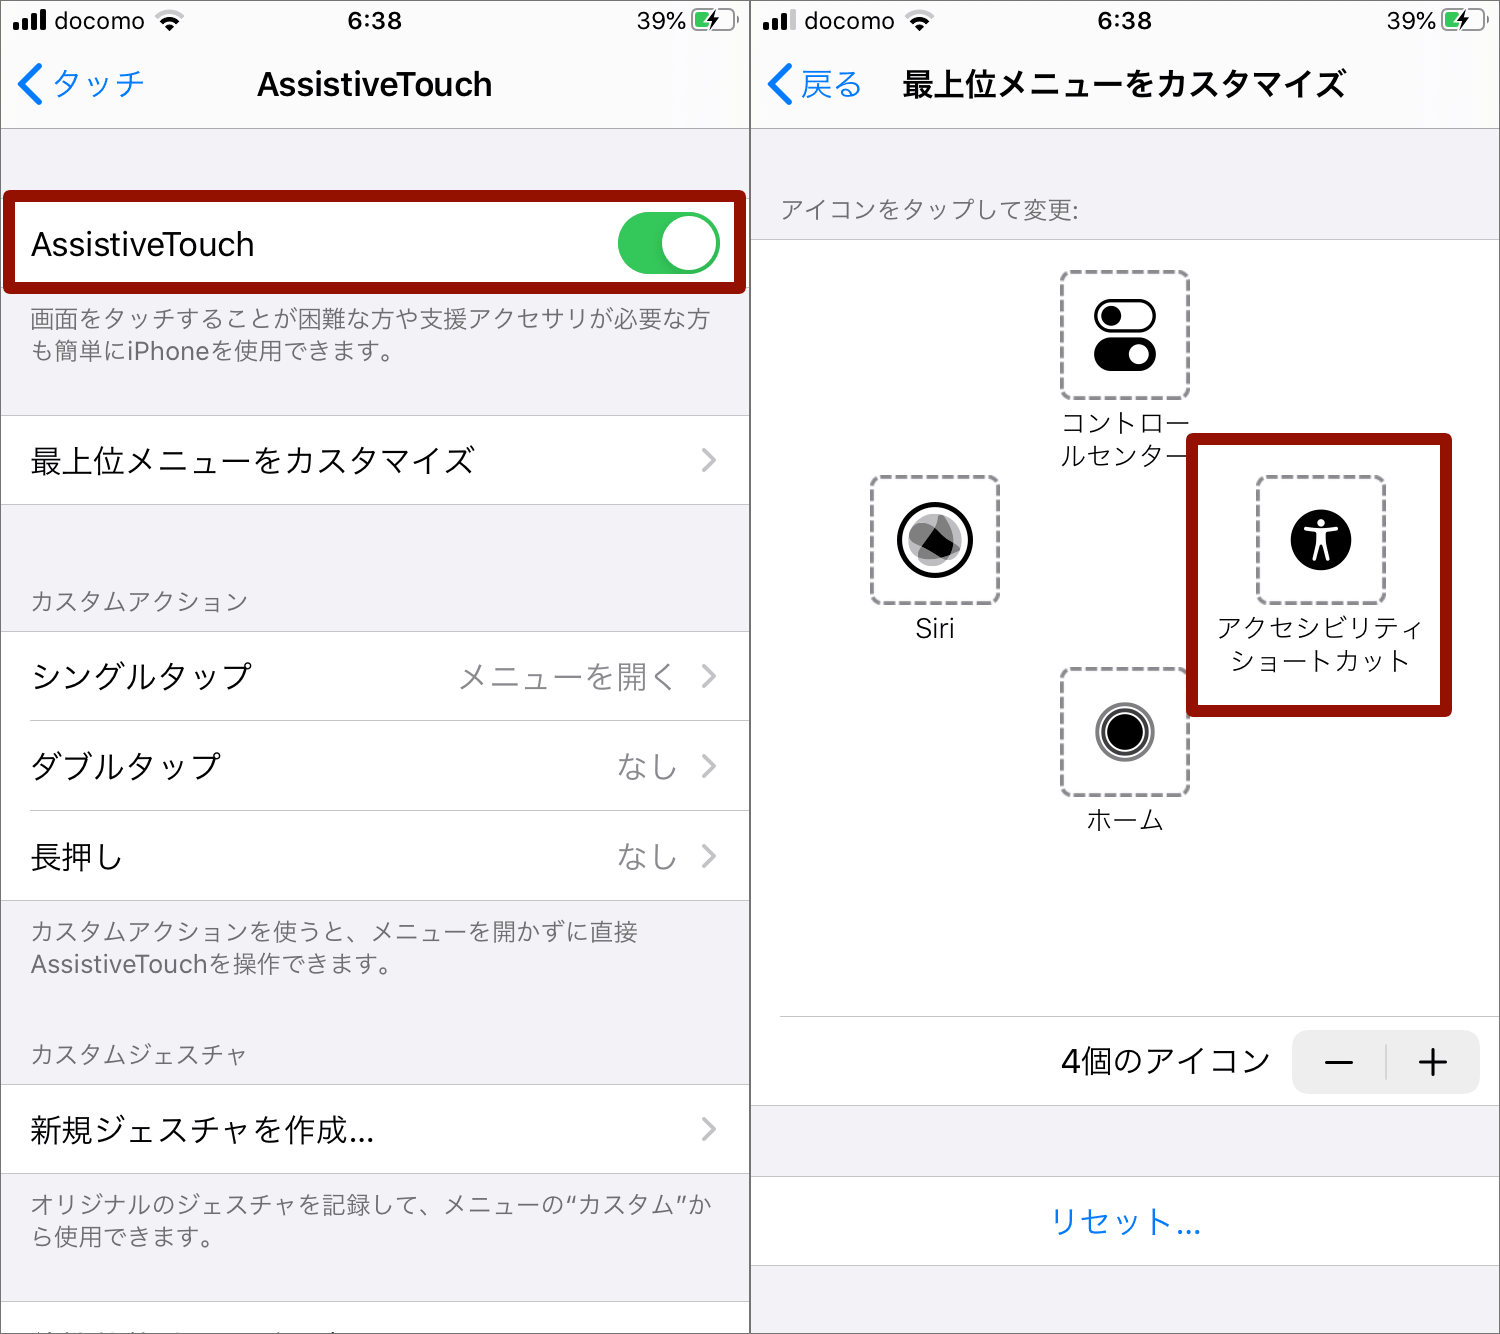 Assistive Touch の設定画面